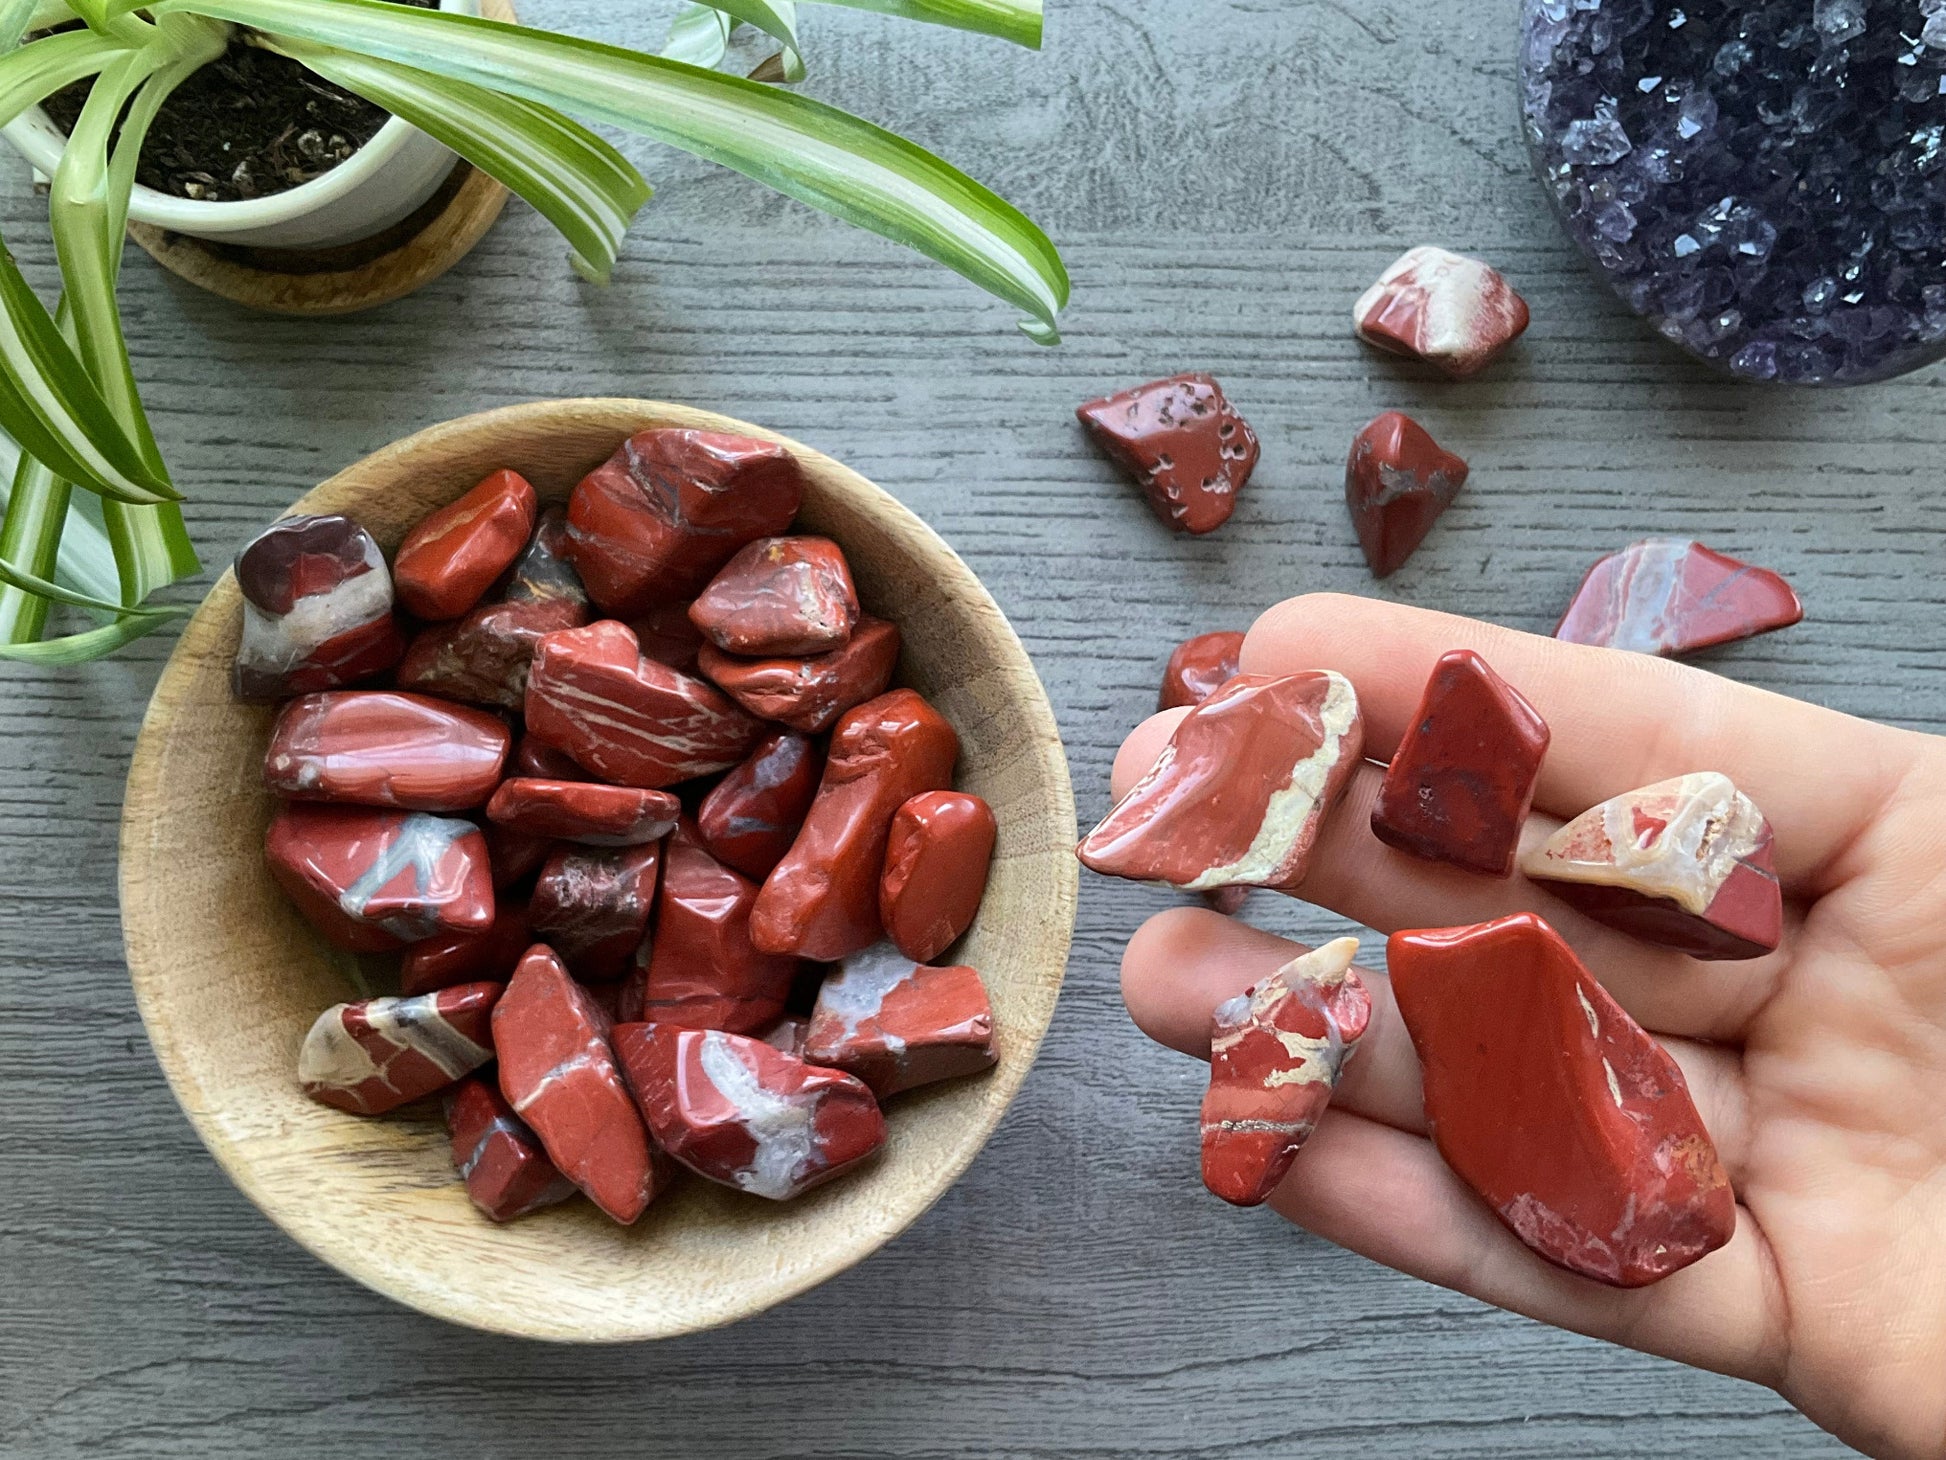 Pictured are various red jasper tumbled stones.